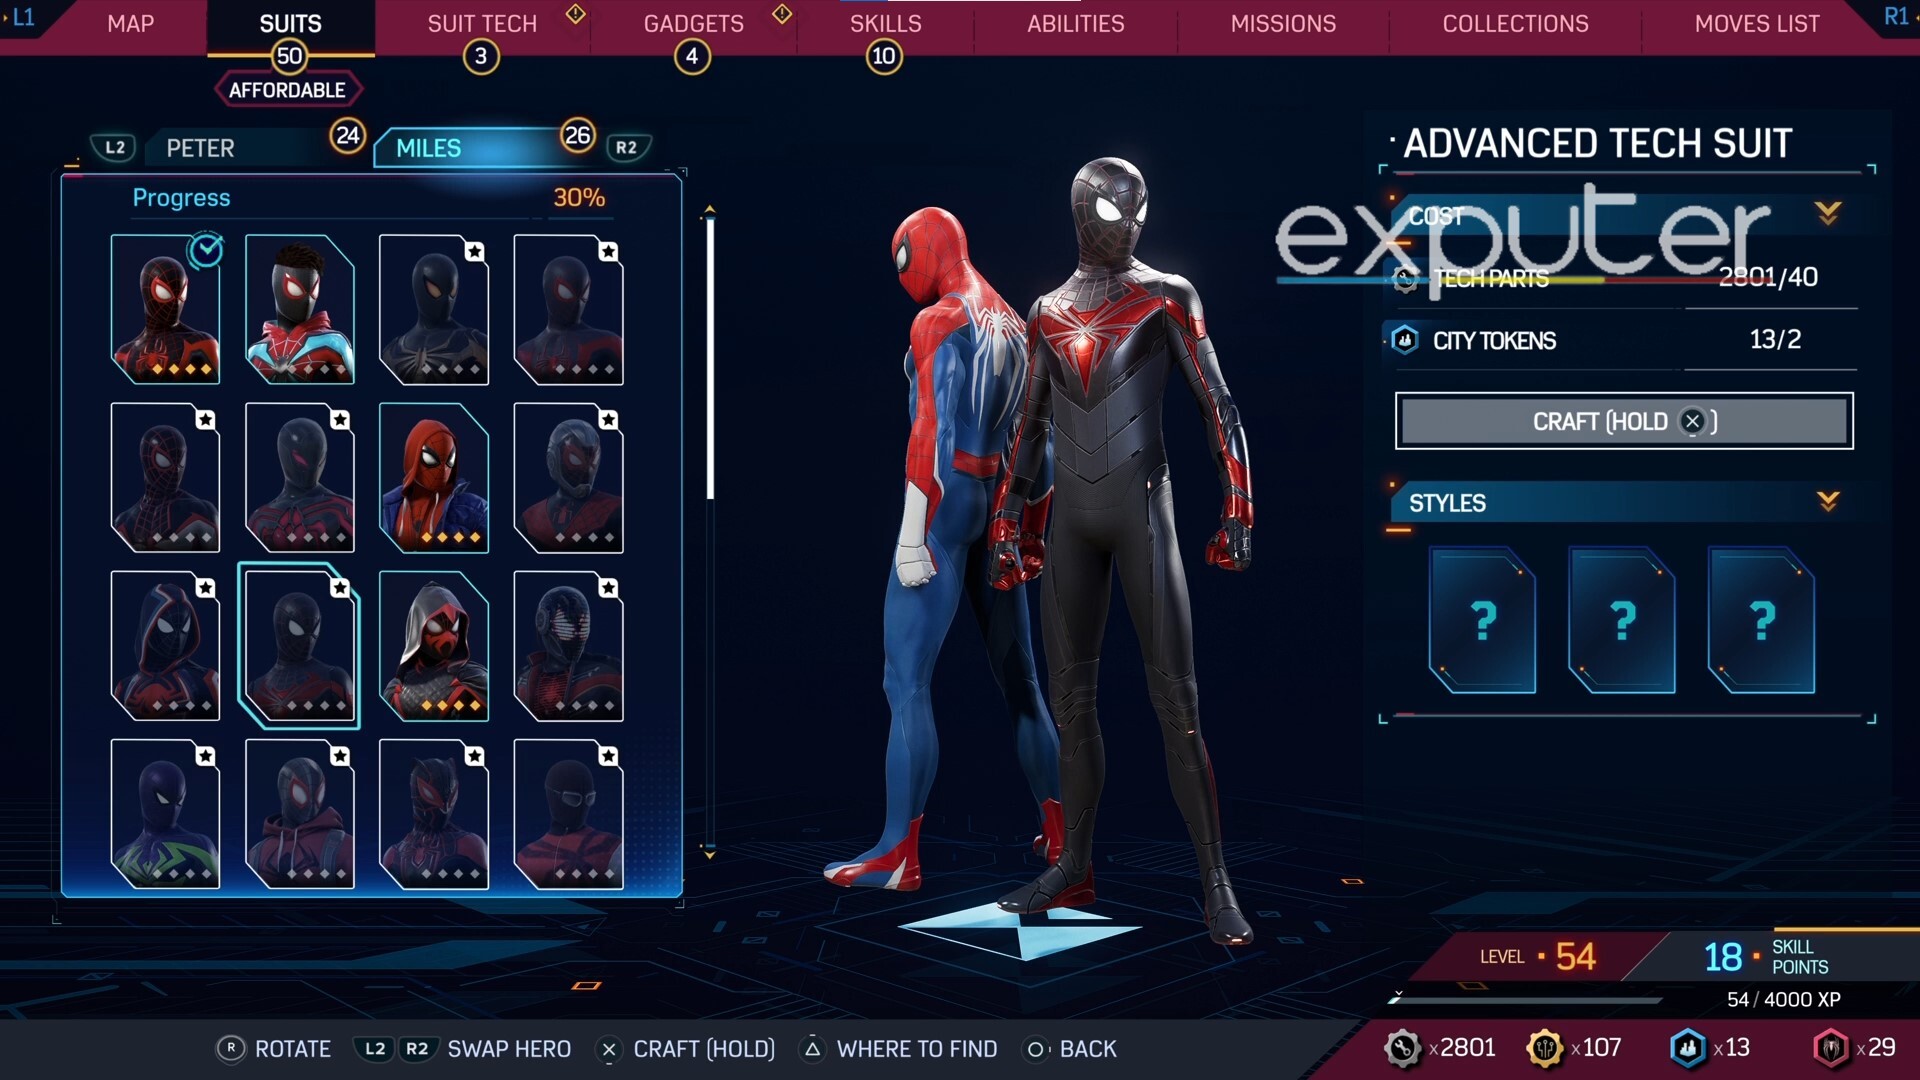 Advanced Tech Suit In Game